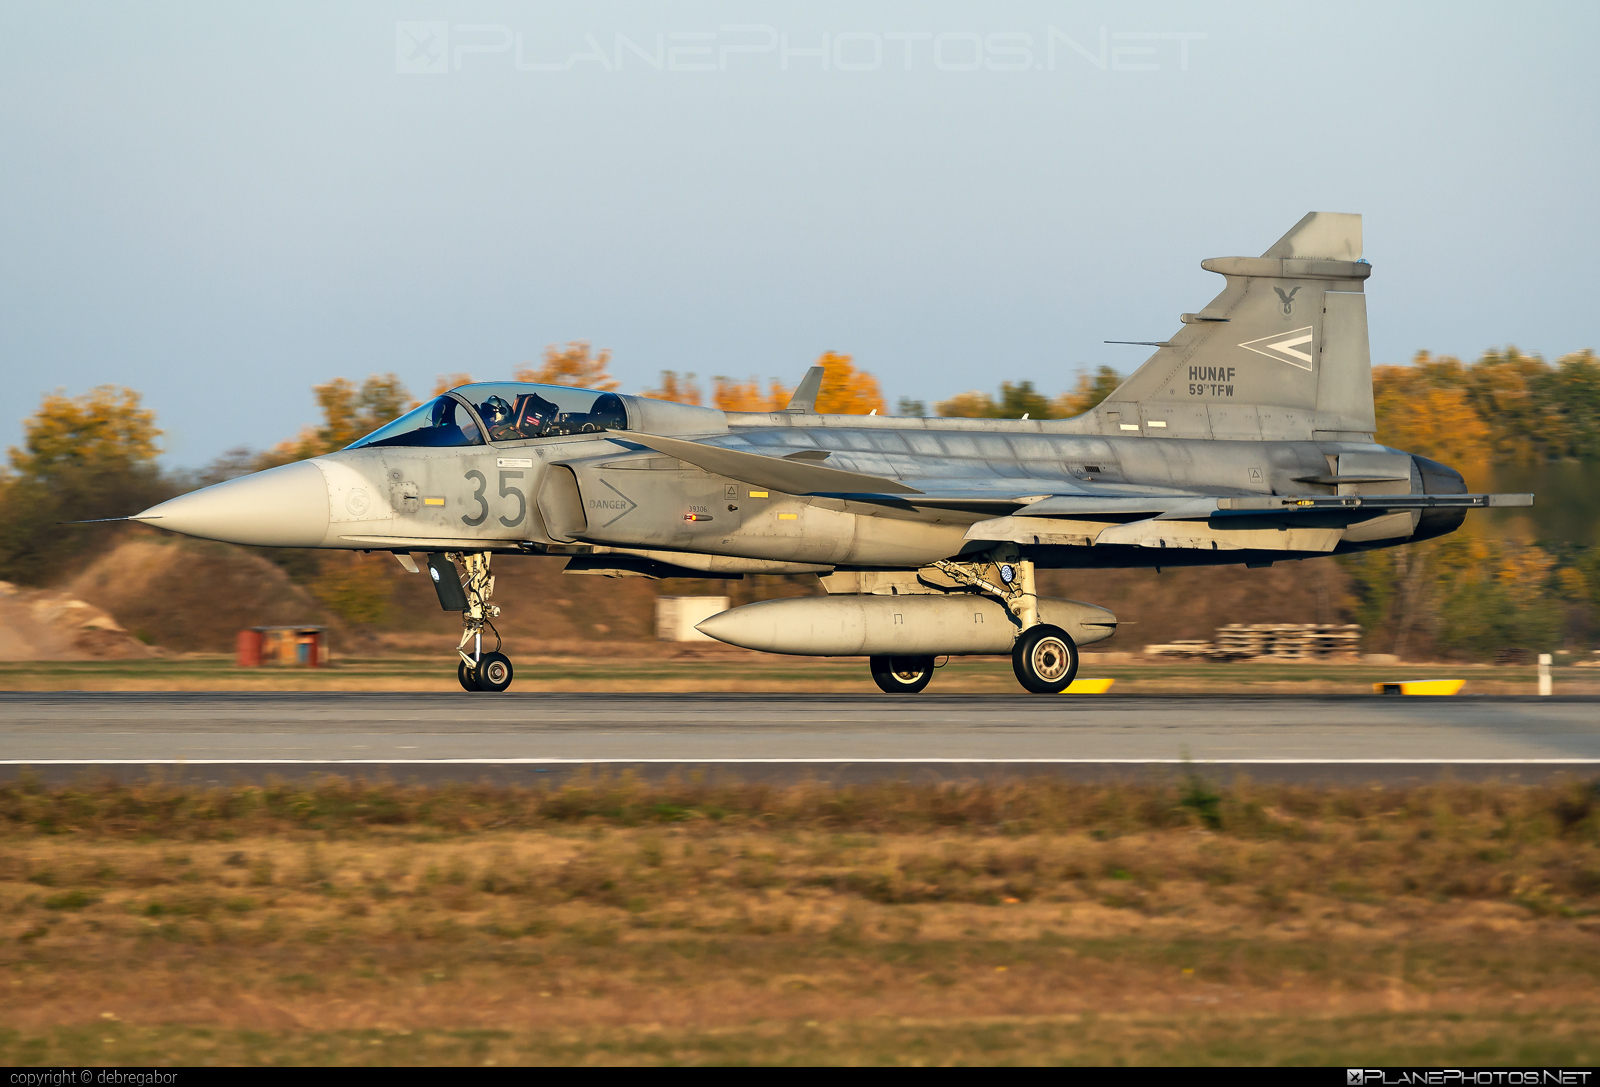 Saab JAS 39C Gripen - 35 operated by Magyar Légierő (Hungarian Air Force) #gripen #hungarianairforce #jas39 #jas39c #jas39gripen #magyarlegiero #saab